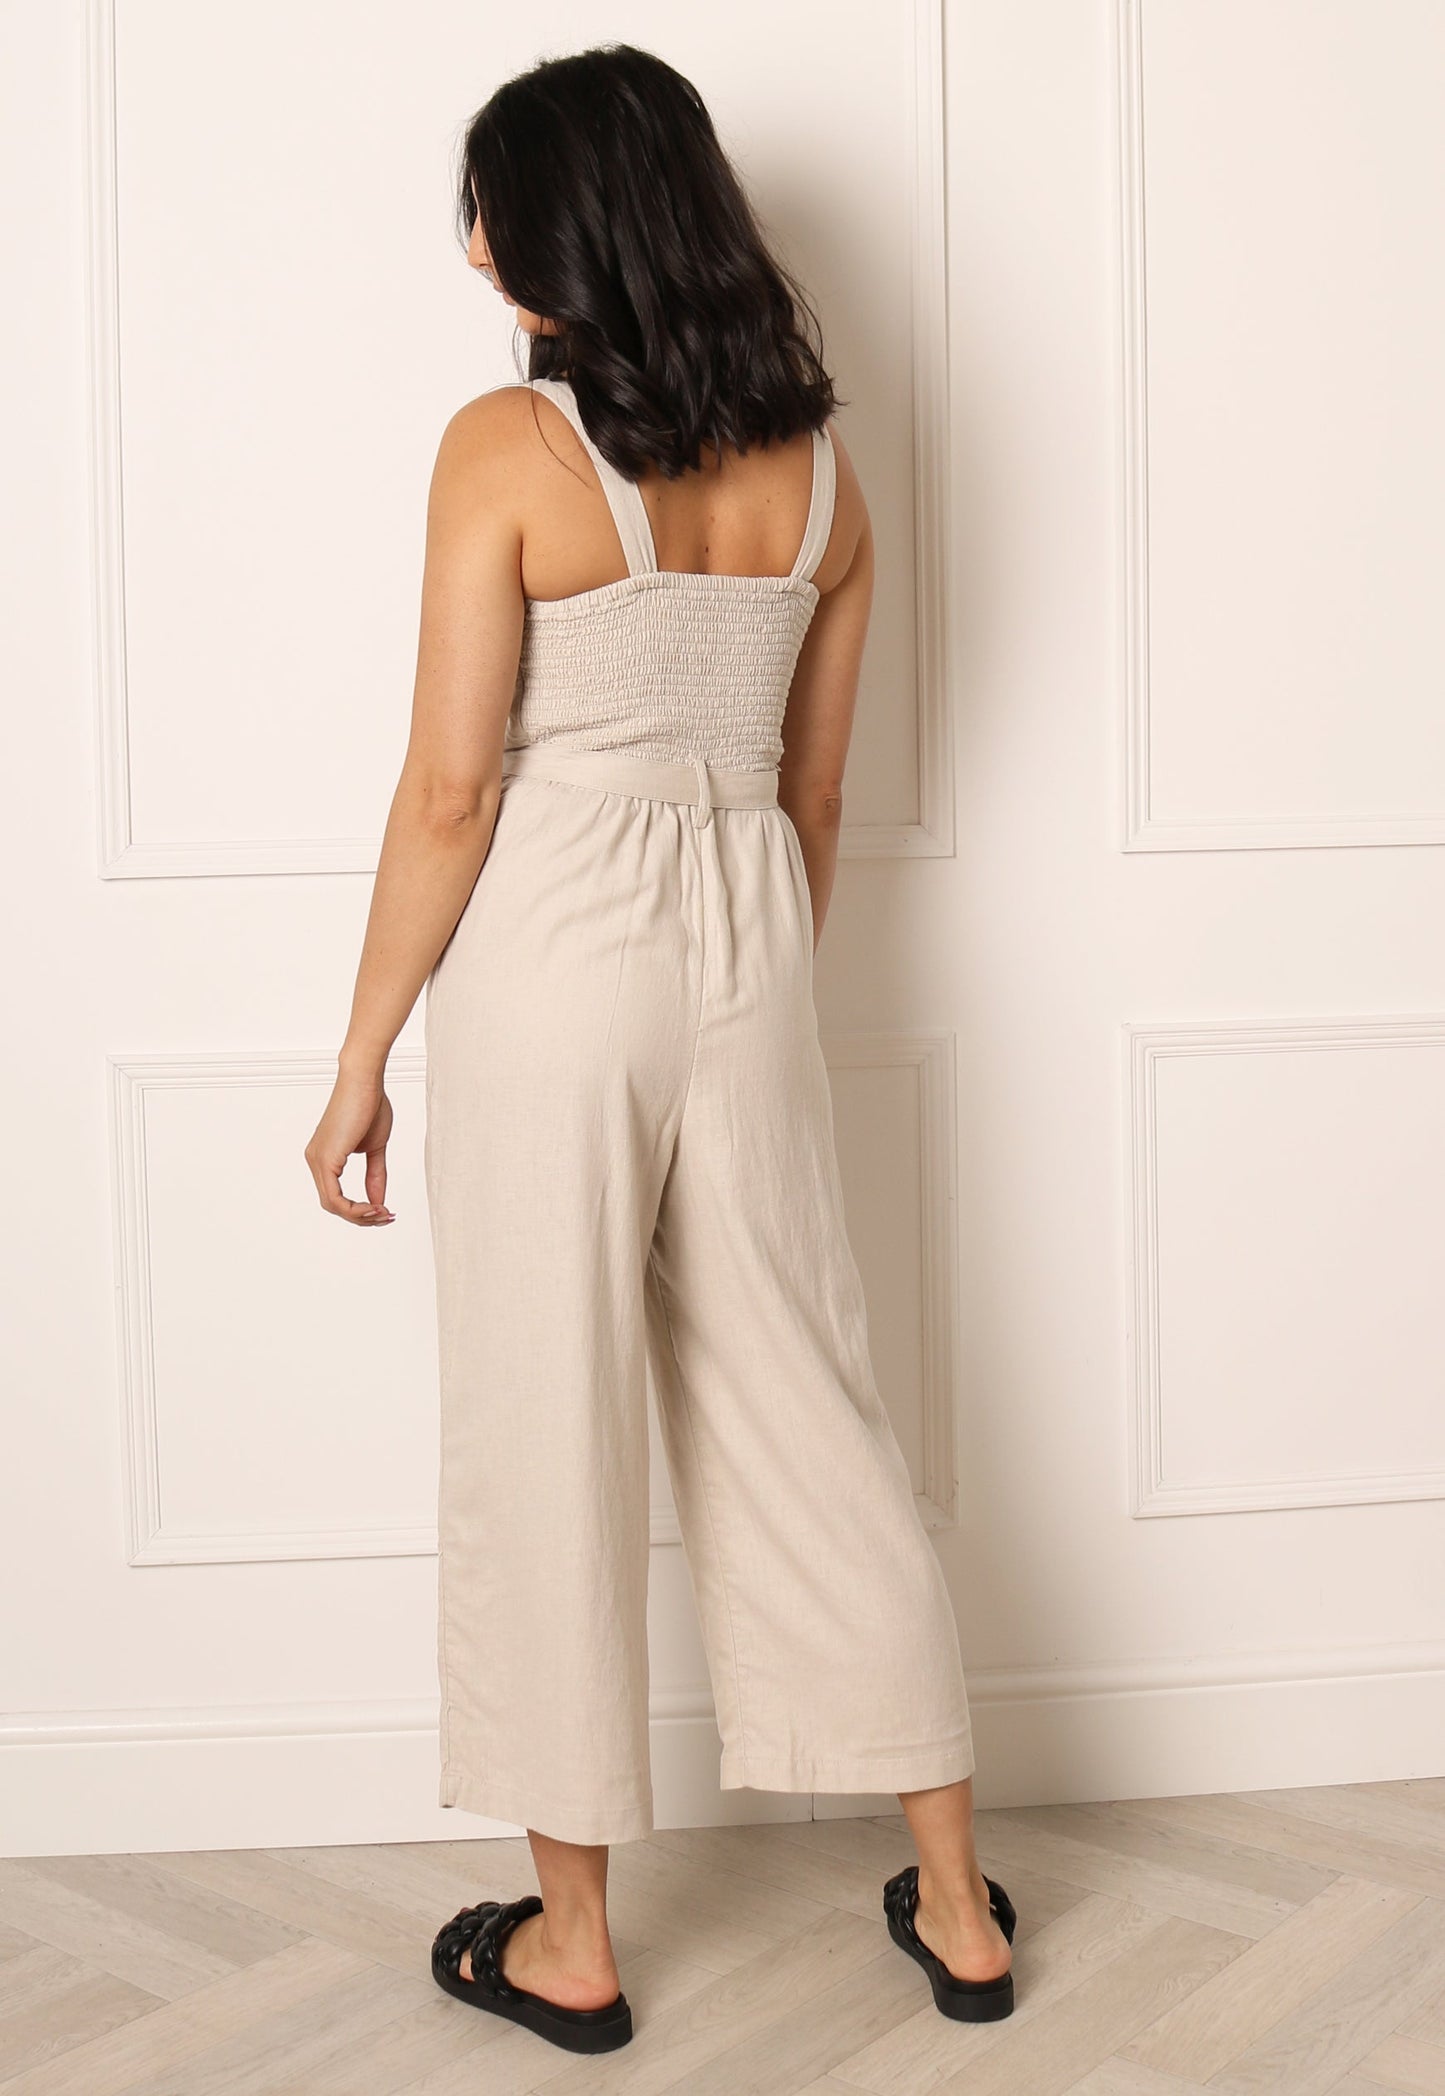 ONLY Caro Linen Strappy Culotte Jumpsuit in Beige - concretebartops